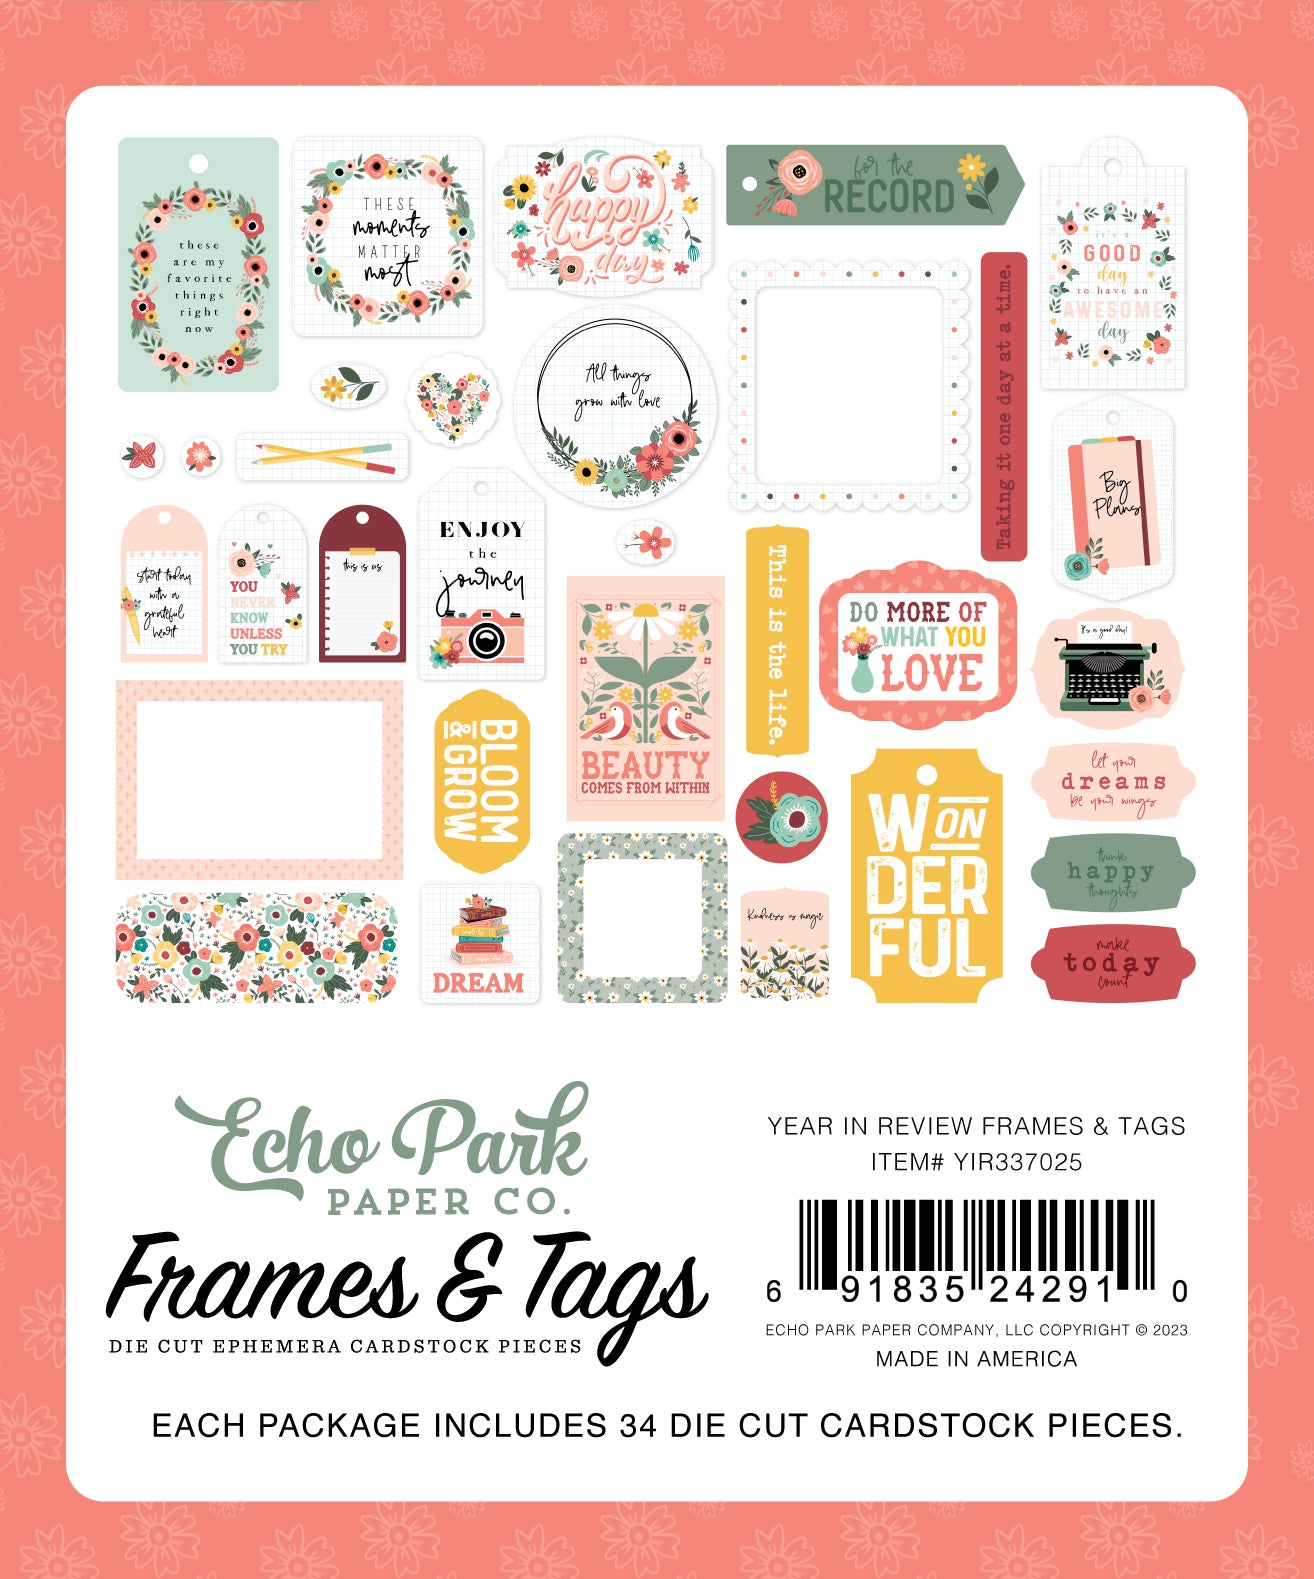 Year In Review Collection 5 x 5 Scrapbook Frames & Tags by Echo Park Paper